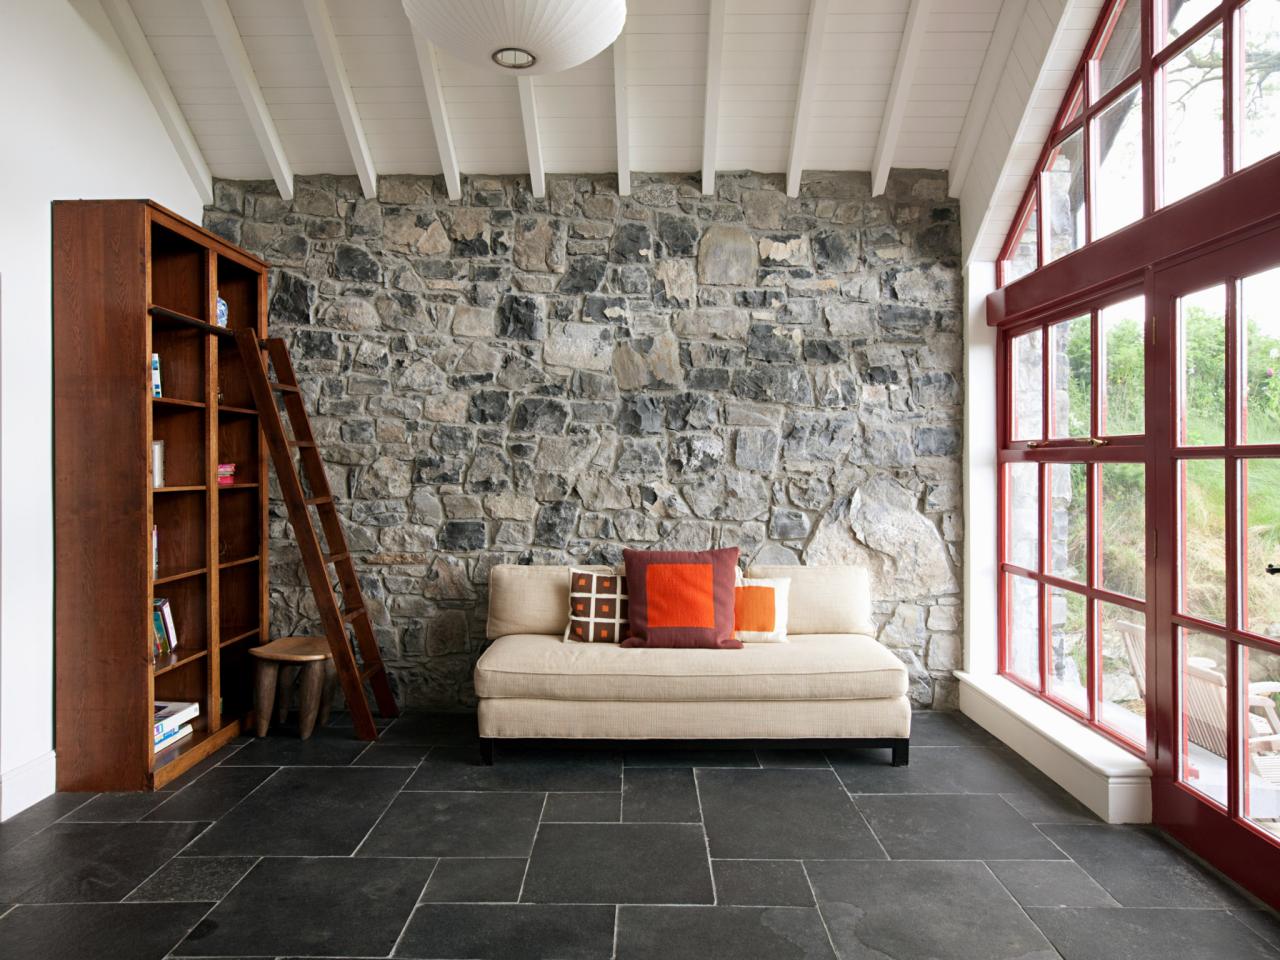 The Diffe Types Of Stone Flooring Diy, Stone Like Tile Floor